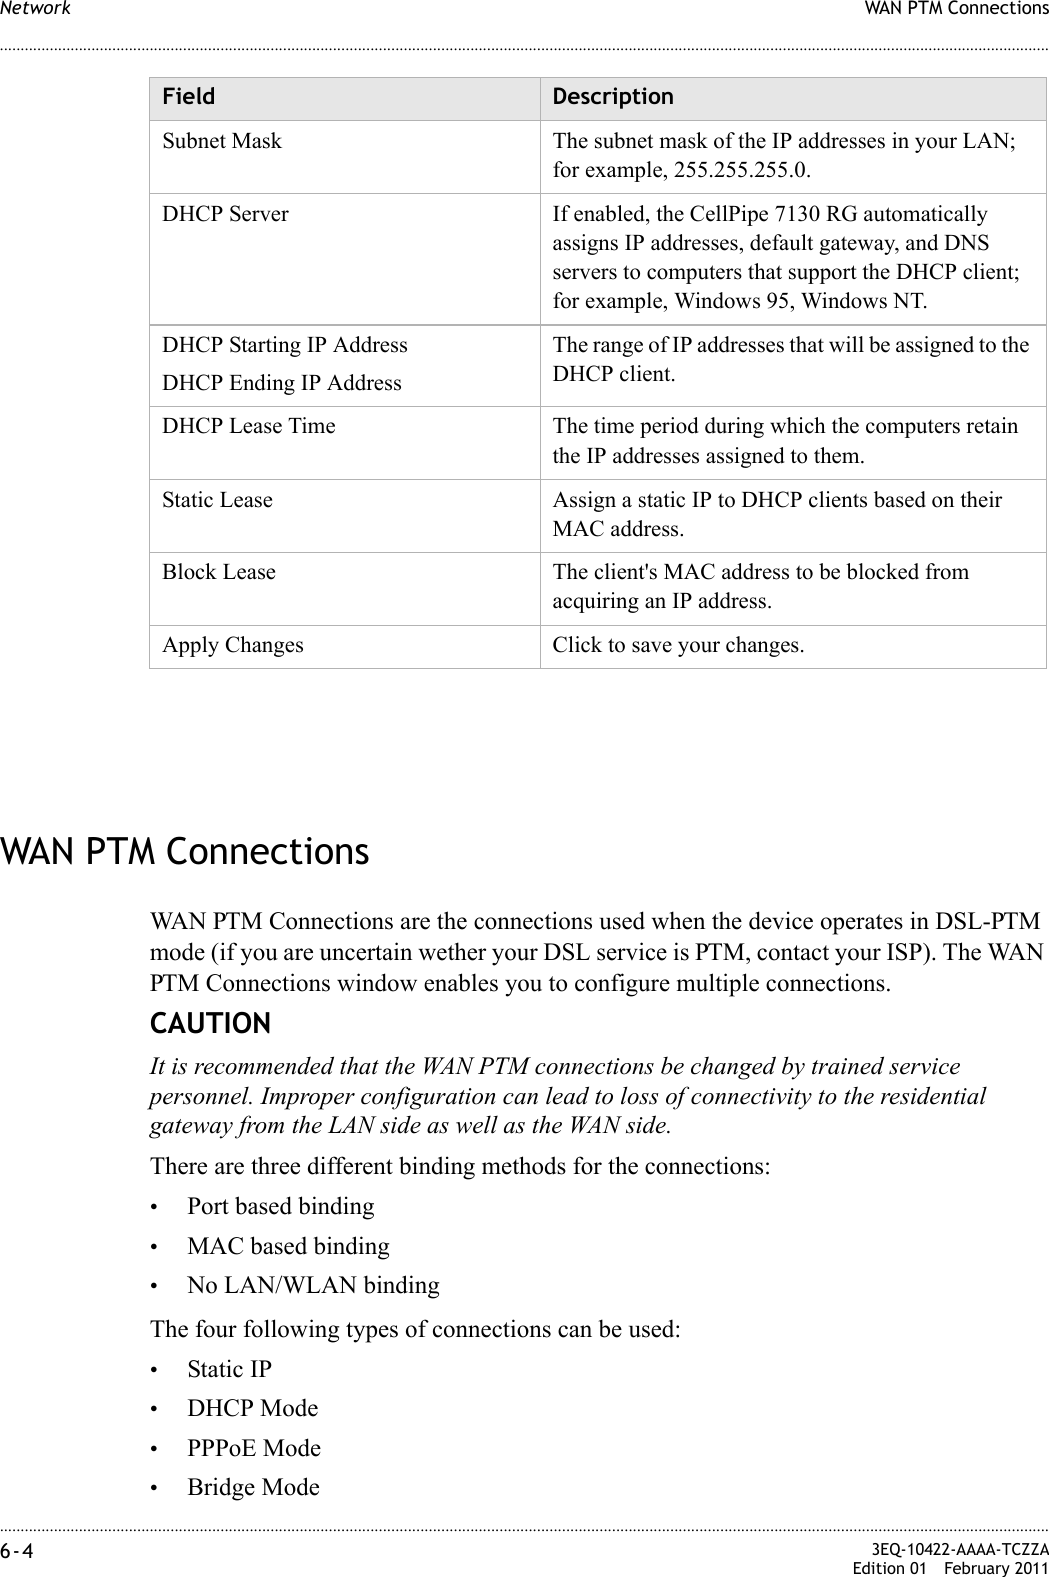 ............................................................................................................................................................................................................................................................WAN PTM ConnectionsNetwork6-4  3EQ-10422-AAAA-TCZZAEdition 01 February 2011............................................................................................................................................................................................................................................................WAN PTM ConnectionsWAN PTM Connections are the connections used when the device operates in DSL-PTM mode (if you are uncertain wether your DSL service is PTM, contact your ISP). The WAN PTM Connections window enables you to configure multiple connections.CAUTIONIt is recommended that the WAN PTM connections be changed by trained service personnel. Improper configuration can lead to loss of connectivity to the residential gateway from the LAN side as well as the WAN side.There are three different binding methods for the connections: •Port based binding•MAC based binding•No LAN/WLAN bindingThe four following types of connections can be used:•Static IP•DHCP Mode•PPPoE Mode•Bridge ModeSubnet Mask The subnet mask of the IP addresses in your LAN; for example, 255.255.255.0.DHCP Server If enabled, the CellPipe 7130 RG automatically assigns IP addresses, default gateway, and DNS servers to computers that support the DHCP client; for example, Windows 95, Windows NT.DHCP Starting IP AddressDHCP Ending IP AddressThe range of IP addresses that will be assigned to the DHCP client.DHCP Lease Time The time period during which the computers retain the IP addresses assigned to them.Static Lease Assign a static IP to DHCP clients based on their MAC address.Block Lease The client&apos;s MAC address to be blocked from acquiring an IP address.Apply Changes Click to save your changes.Field Description